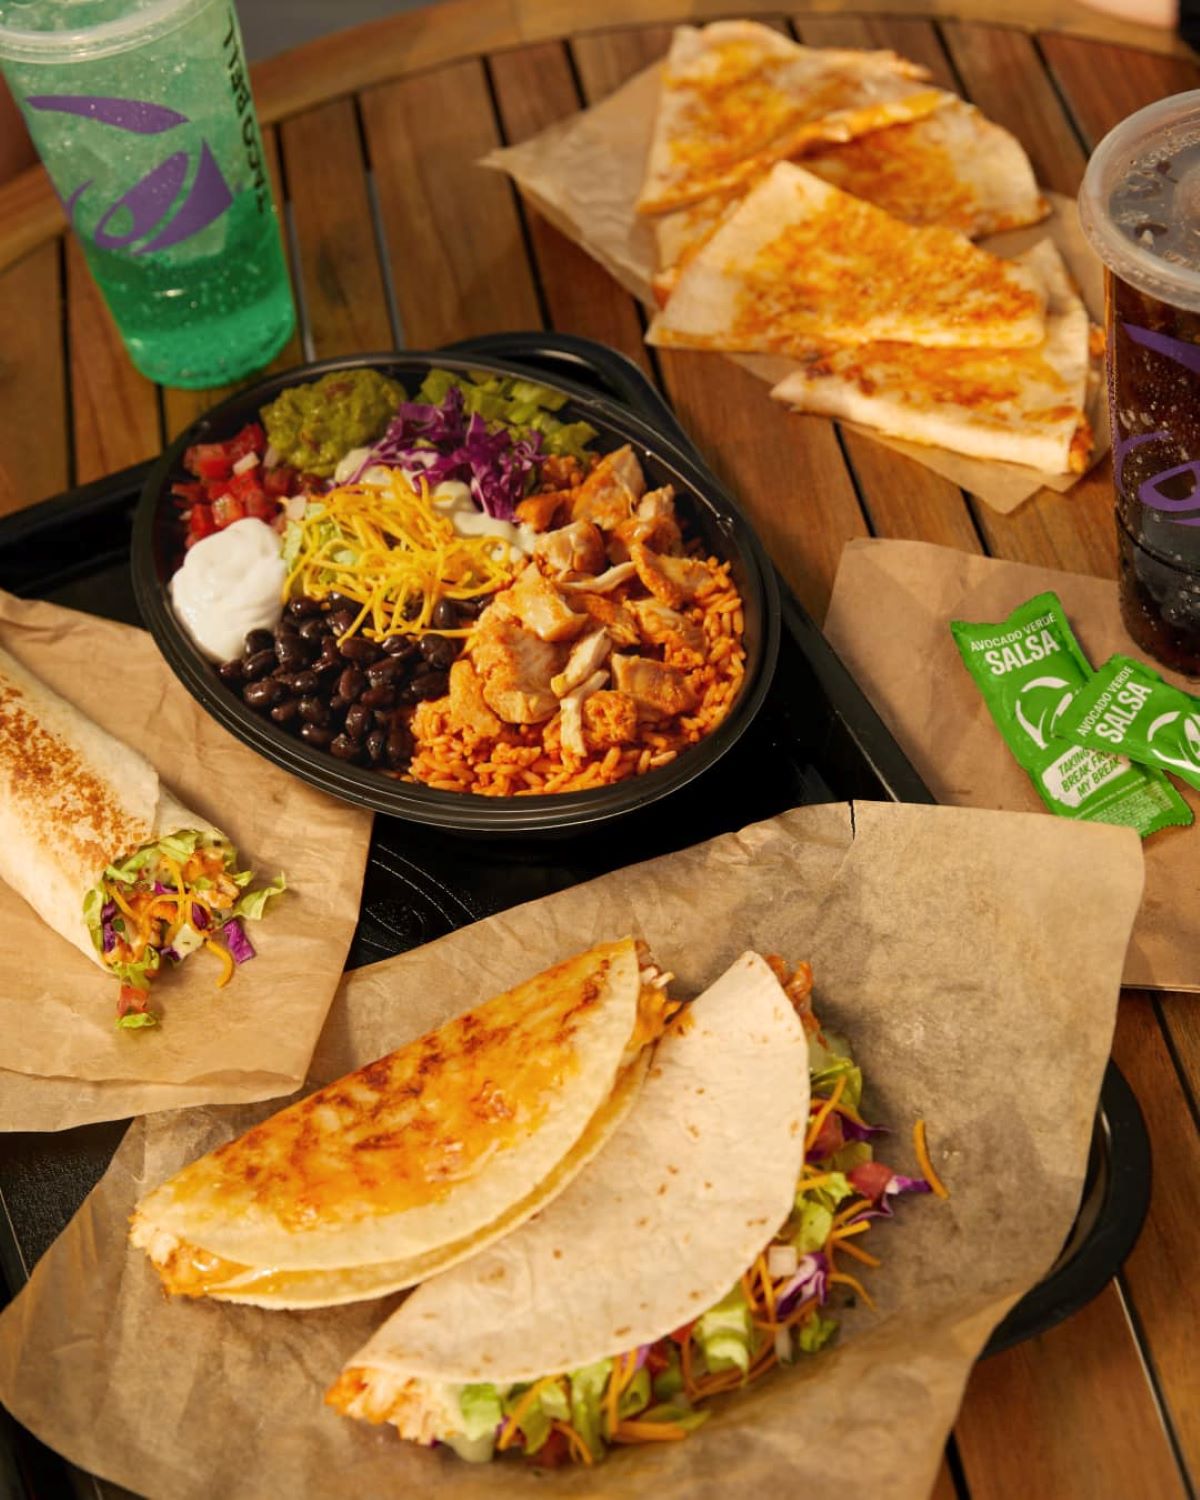 A Columbus Area Taco Bell is Getting a Minor Facelift